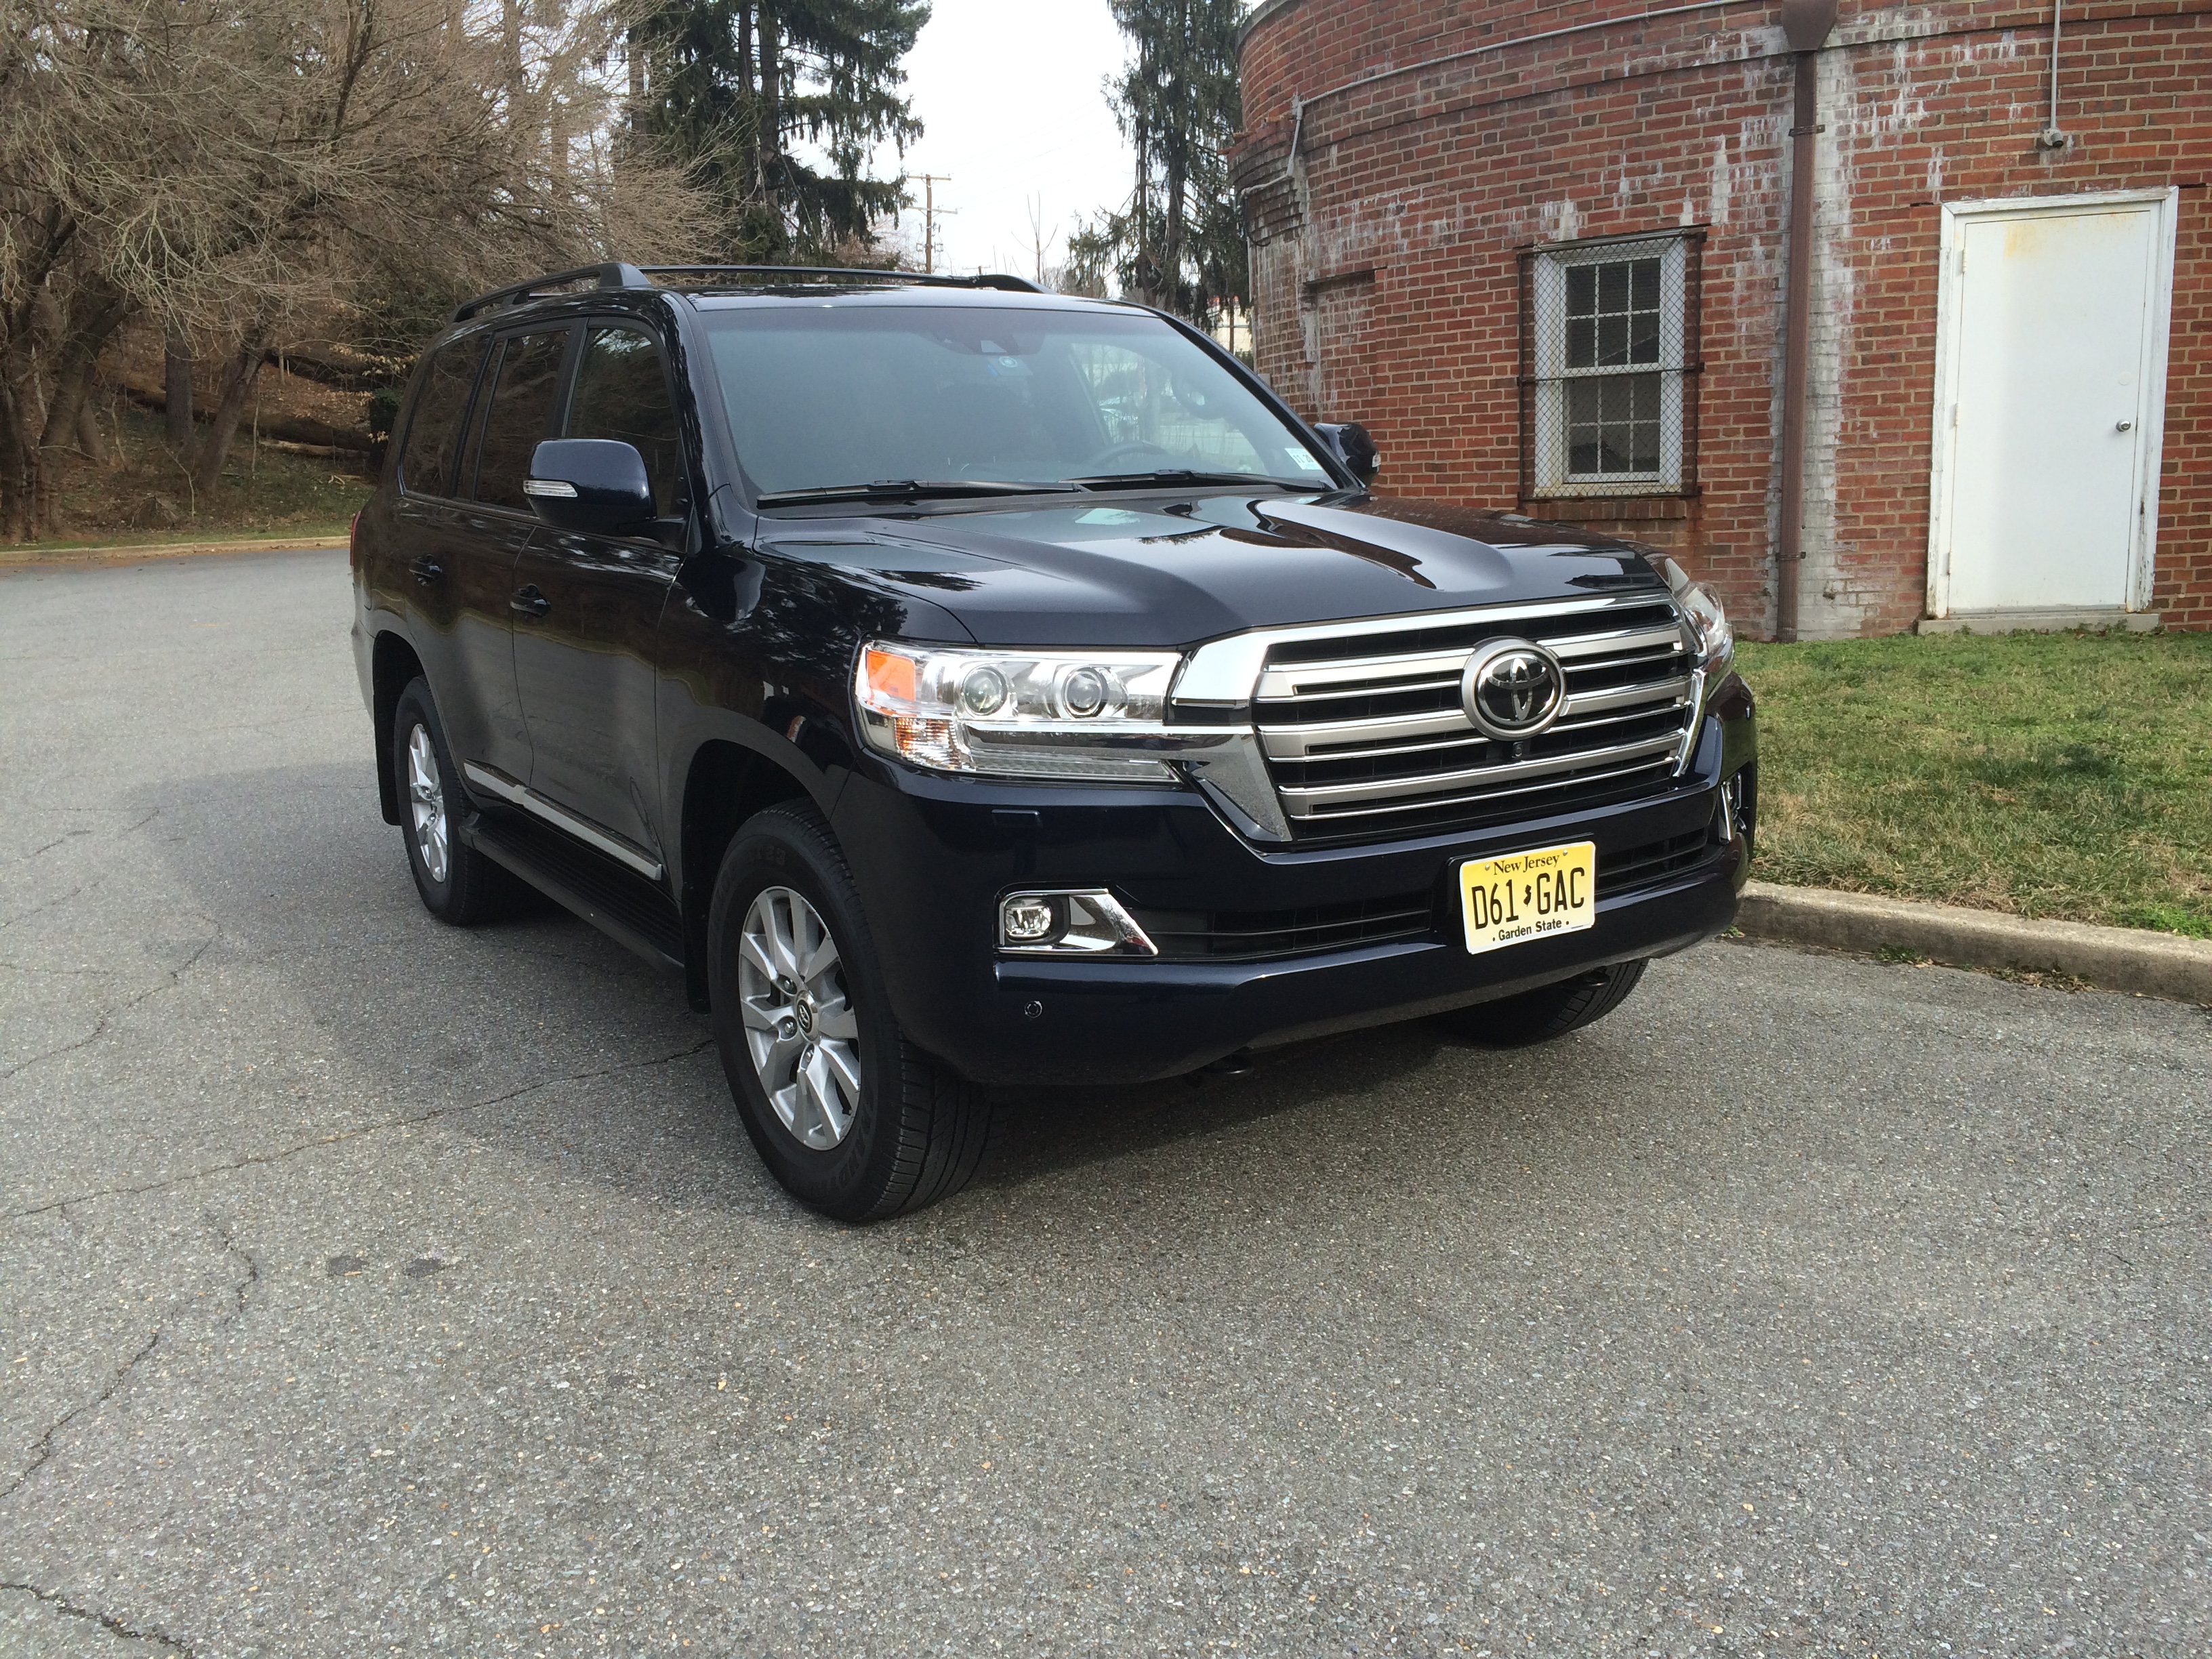 2016 Toyota Land Cruiser stands out in SUV crowd